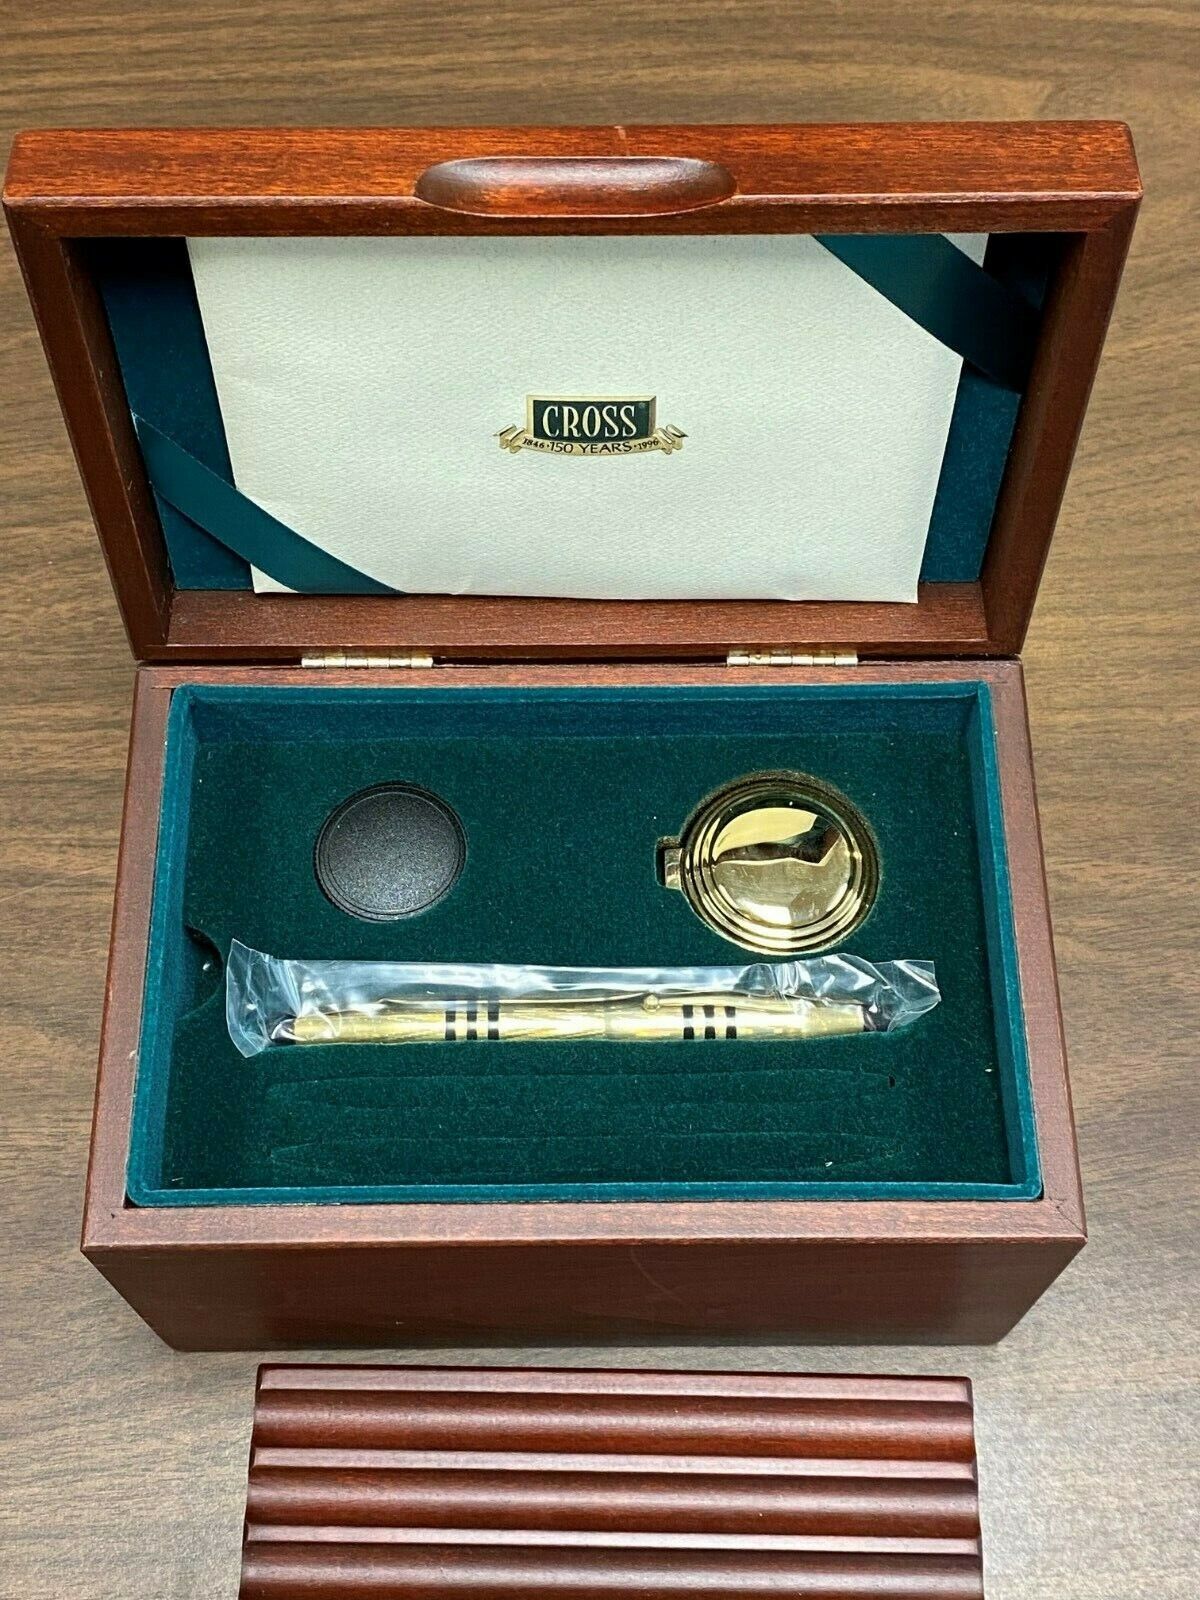 CROSS 150 YEARS LIMITED EDITION ANNIVERSARY UNDIPPED FOUNTAIN PEN IN GOLD